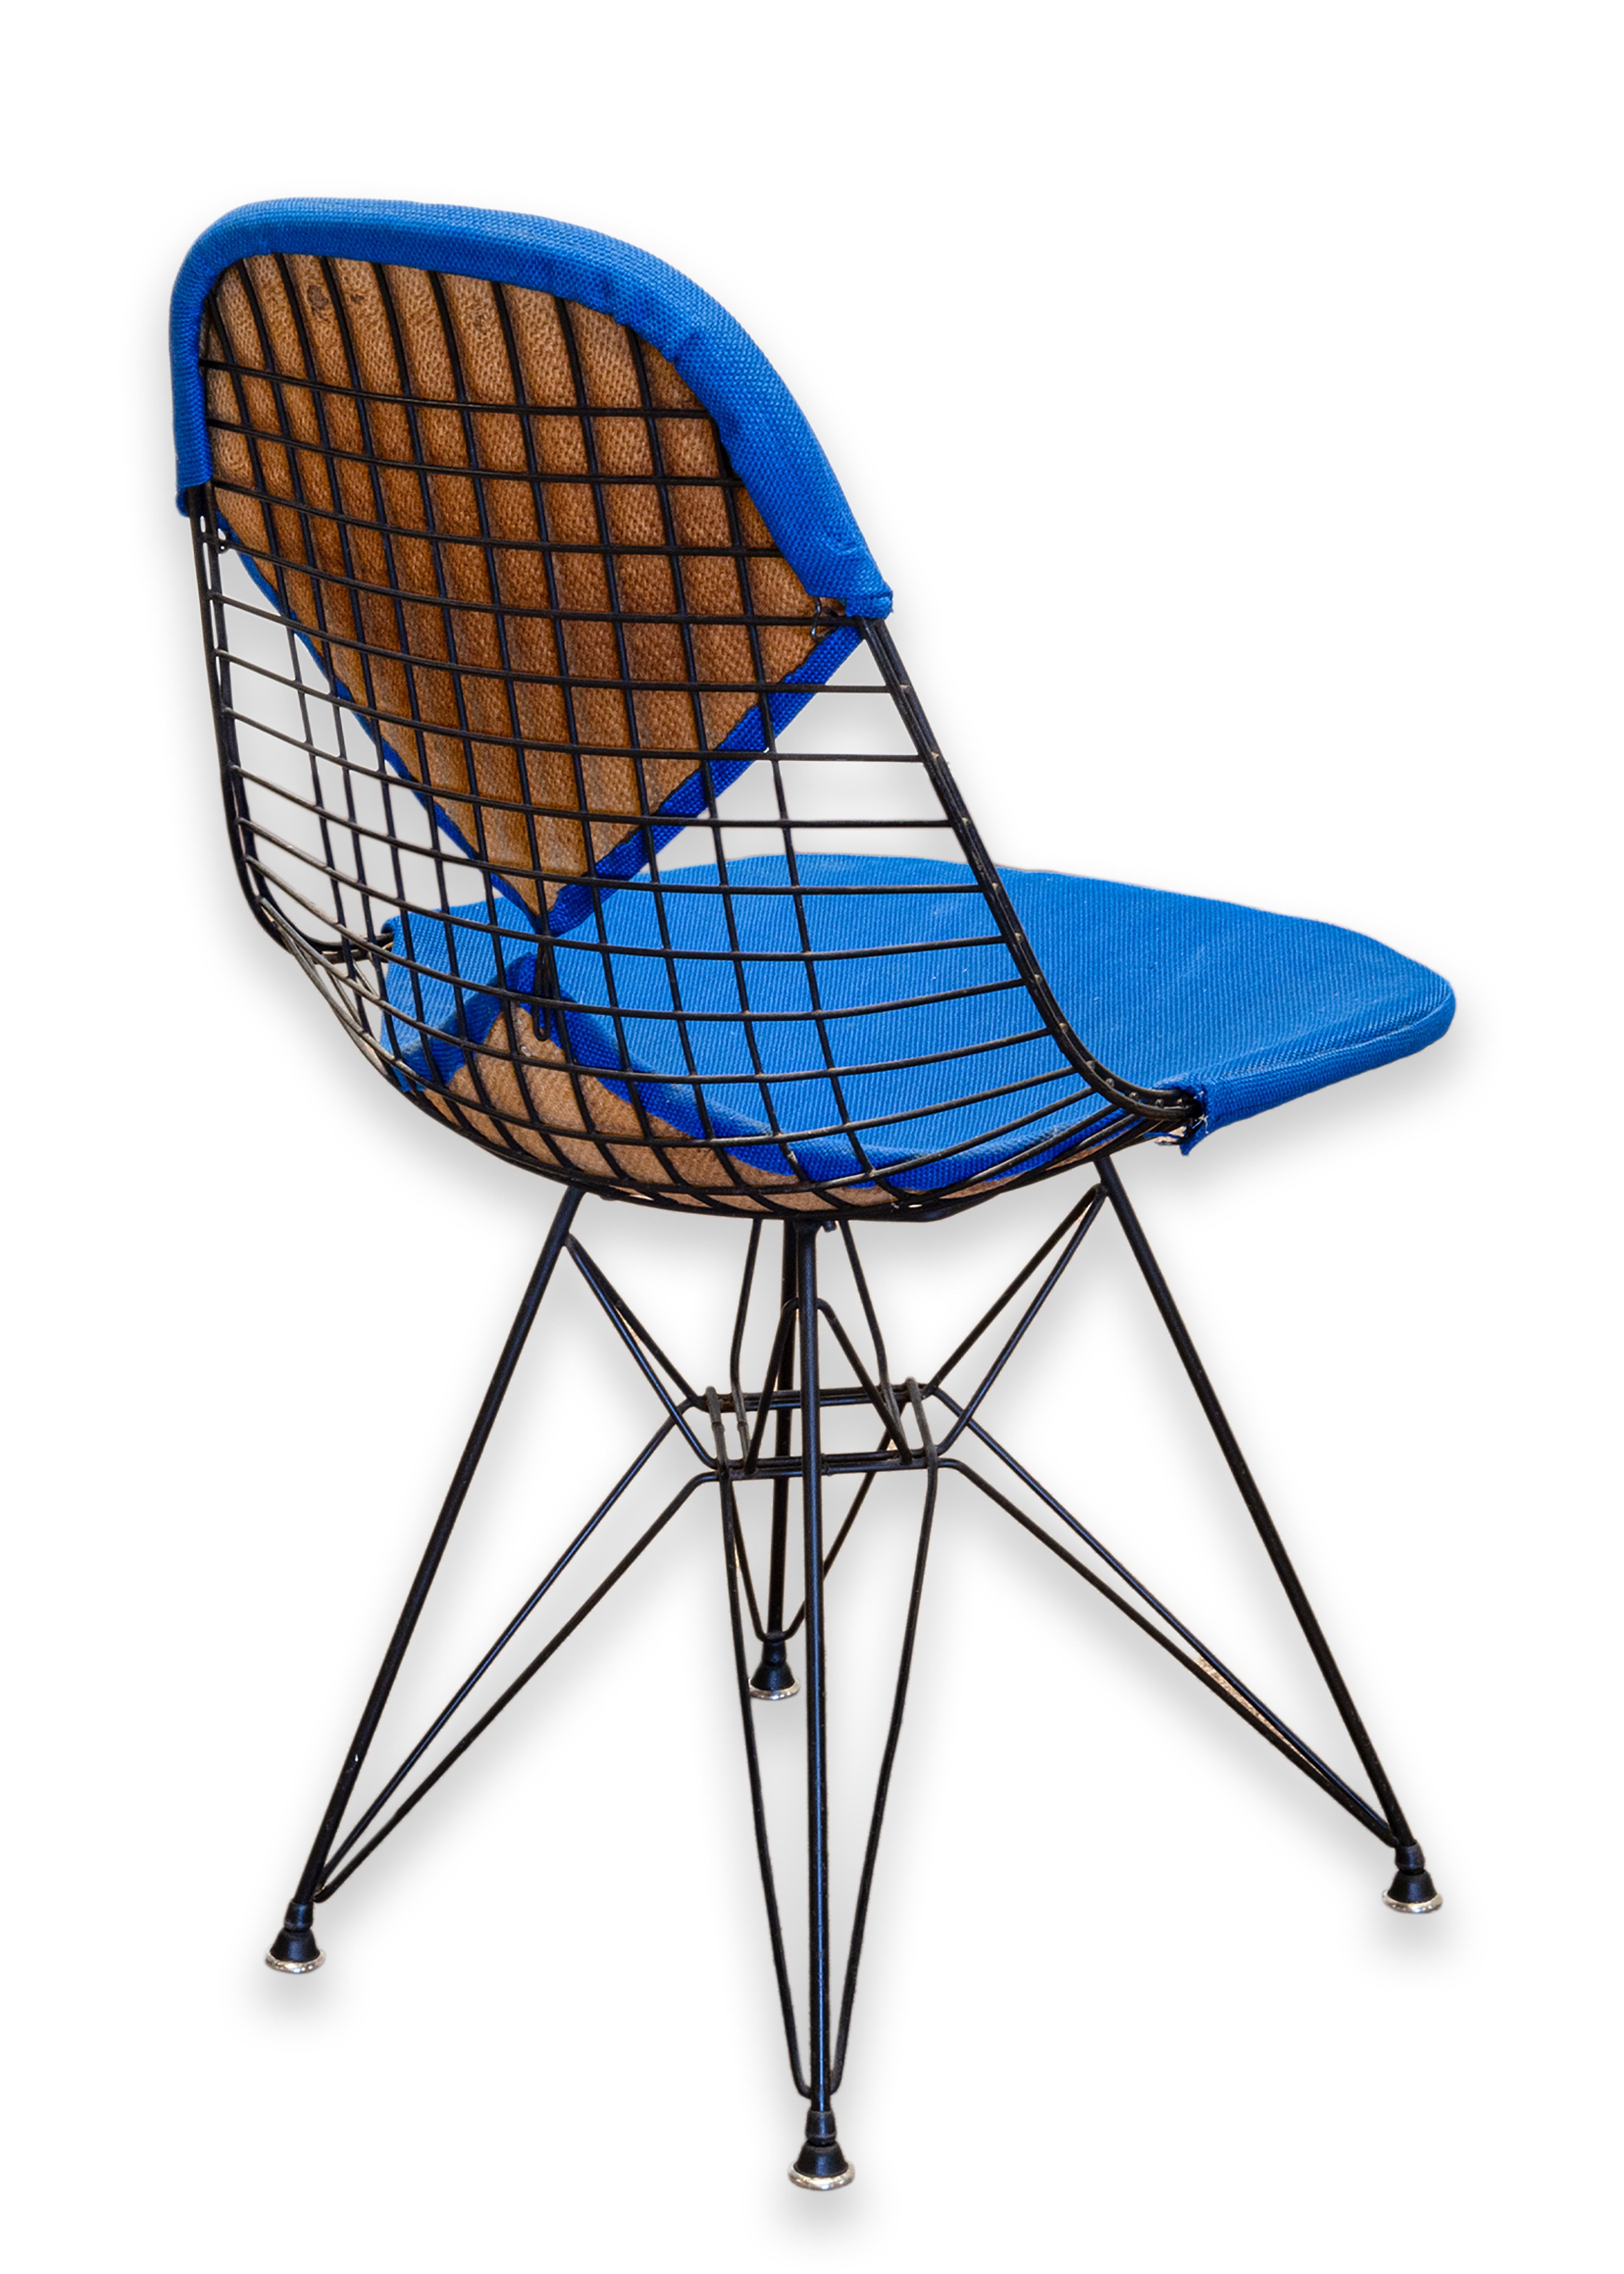 A modernist “DRK-2 Eiffel Chair” designed by Eames for Herman Miller. 1st generation, 1951. Retains the original Herman Miller, Venice, California tag on bottom of seating. Black steel base with original blue upholstery fabric in two pieces – one on